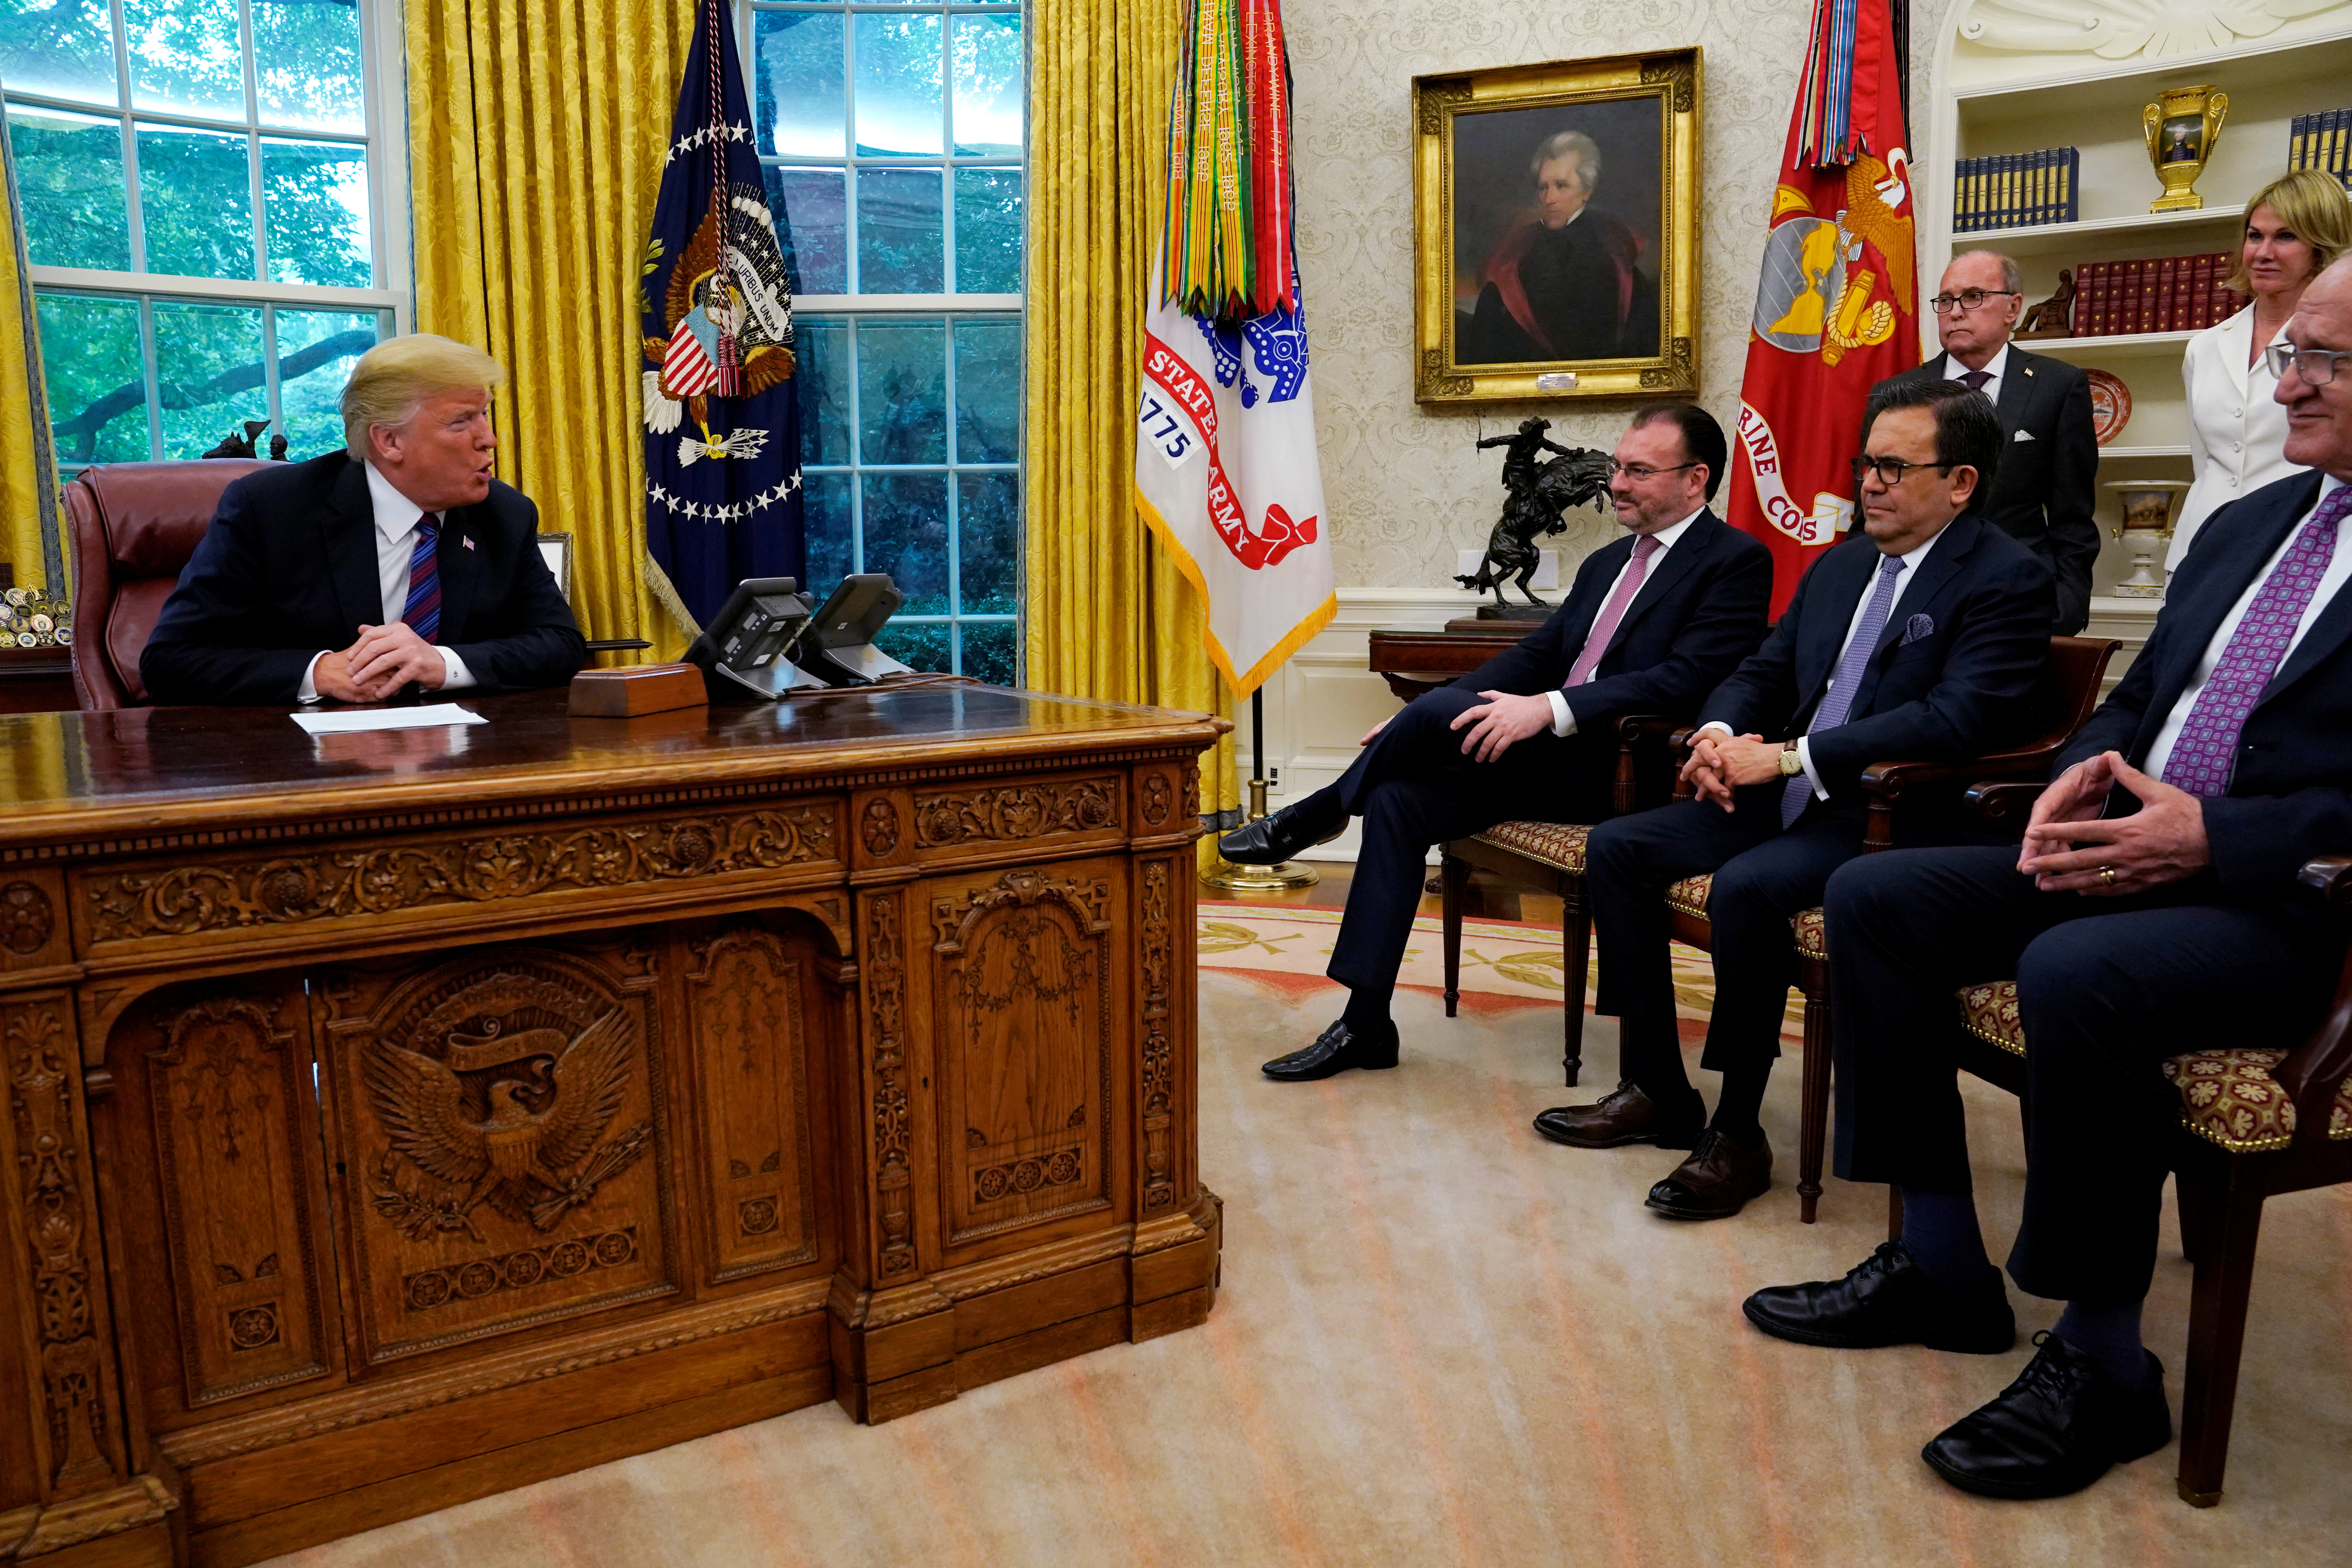 Mexico's Foreign Minister Luis Videgaray (C), Mexico's Economy Minister Ildefonso Guajardo (3rdR), White House chief economic adviser Larry Kudlow (3rdR-standing) and Jesus Seade (R), Mexico's President-elect Obrador's representative in trade negotiations look on as U.S. President Donald Trump (L) announces a deal to replace the North American Free Trade Agreement (NAFTA) at the White House in Washington, U.S., August 27, 2018. REUTERS/Kevin Lamarque